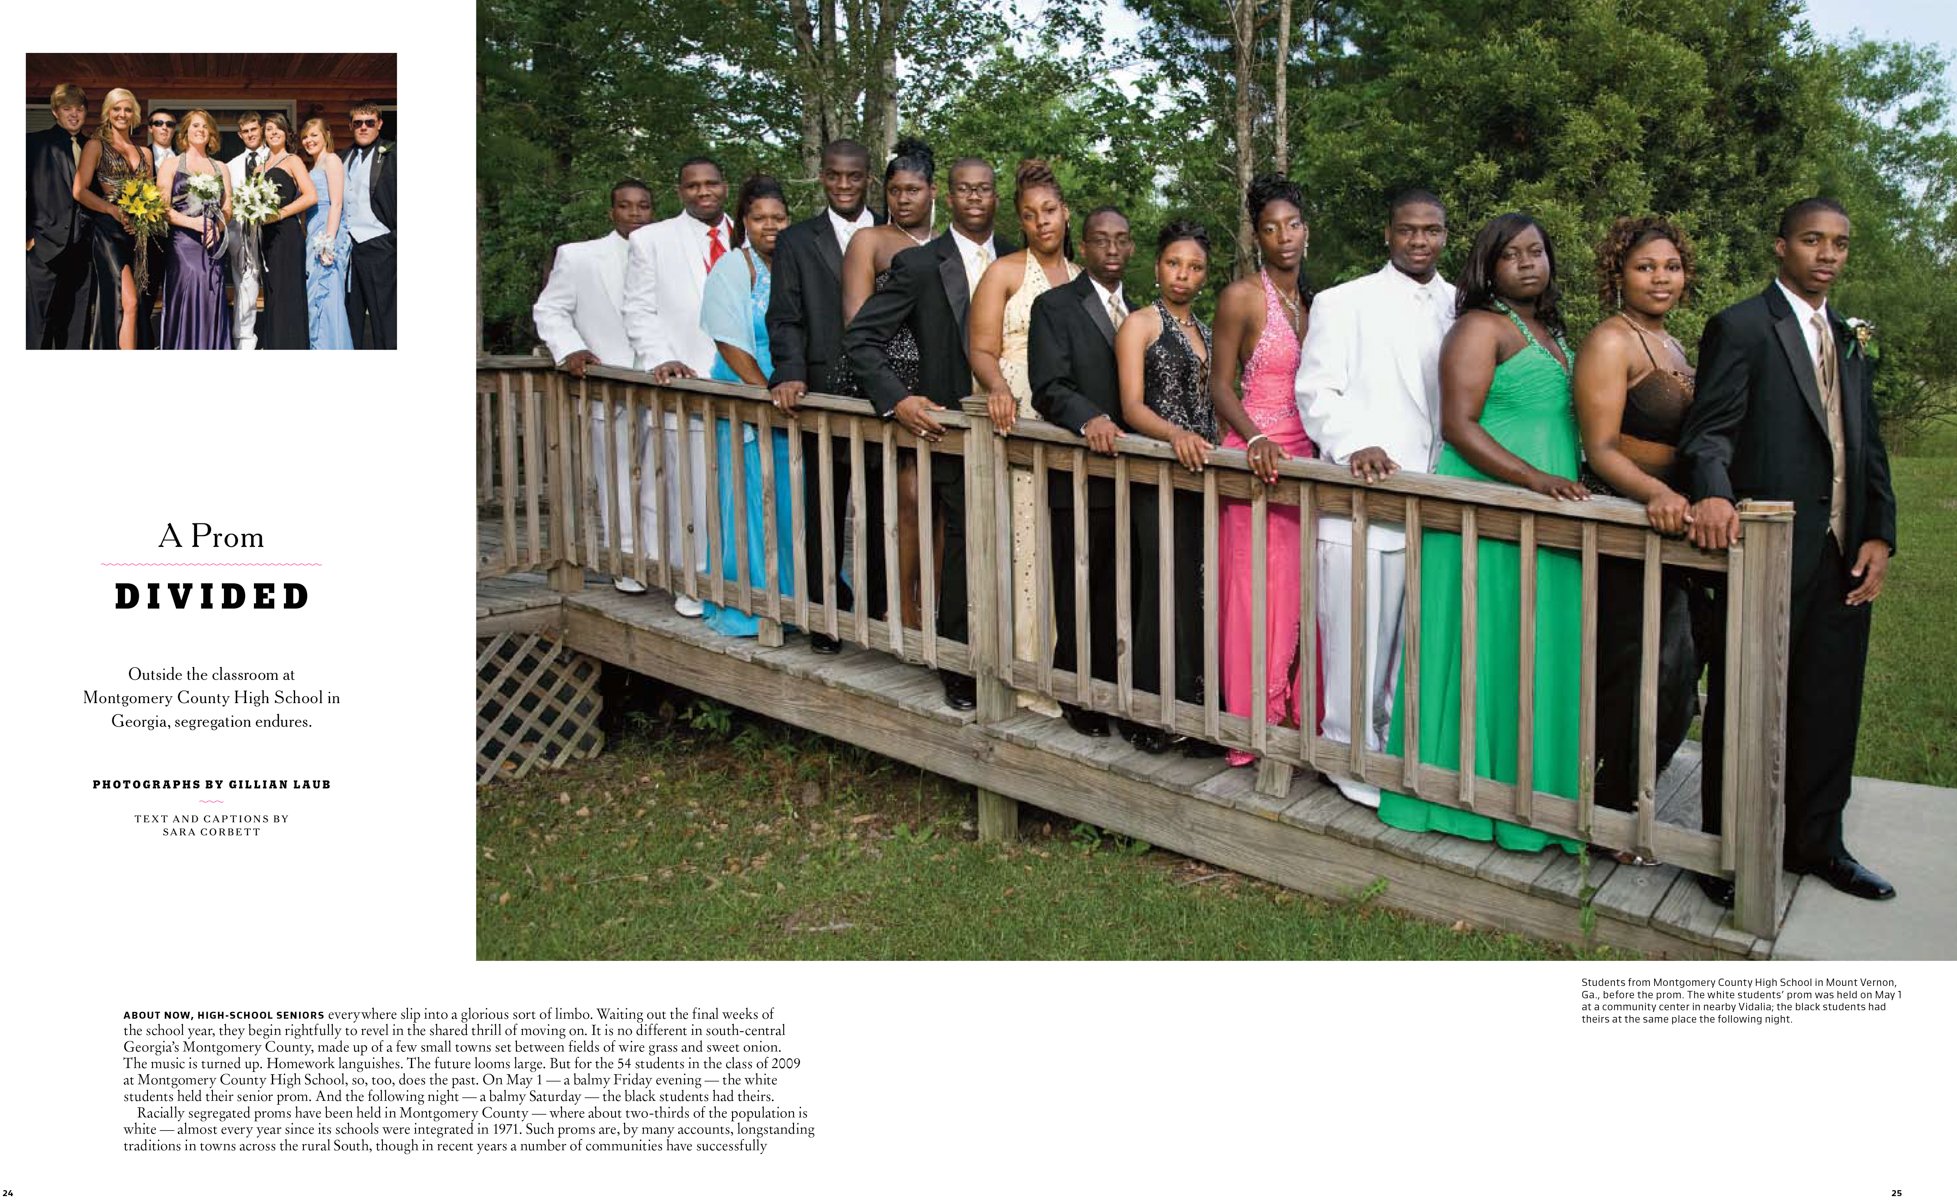 Sara Corbett / “A Prom Divided,” New York Times Magazine, May 21, 2009 / Featuring photographs by Gillian Laub